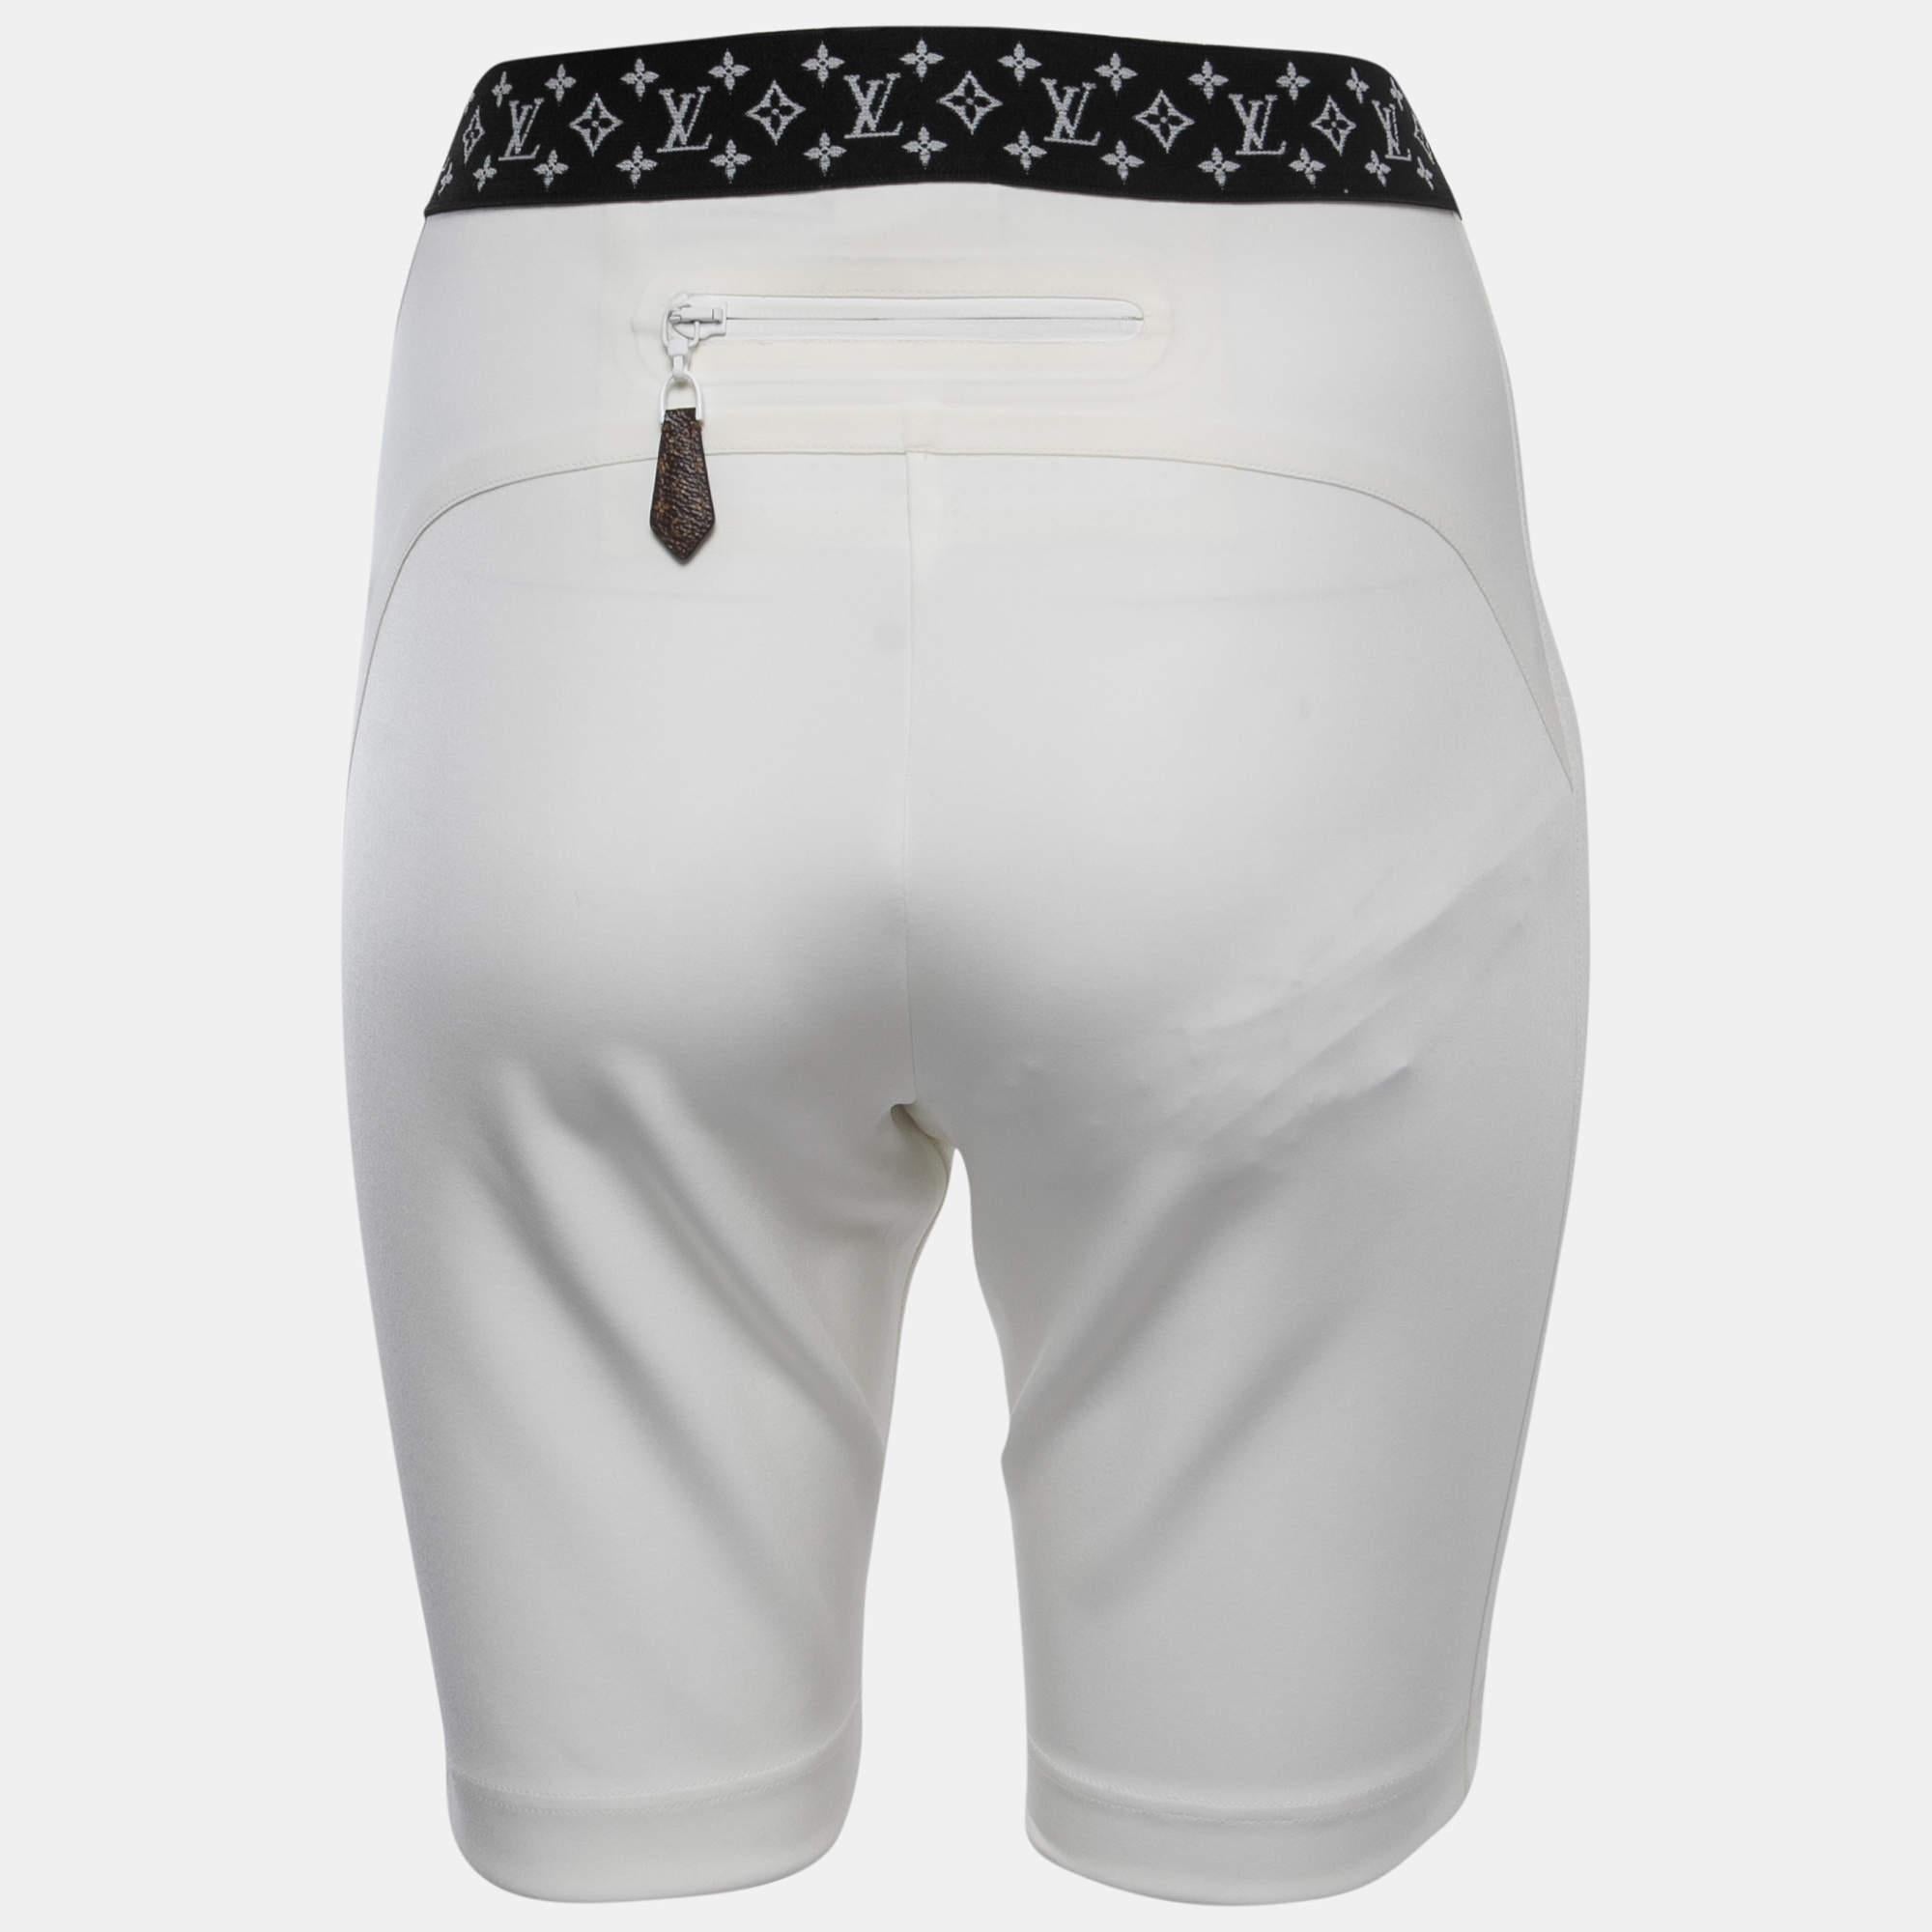 The Louis Vuitton x URS Fischer cycling shorts are a high-fashion collaboration piece. They feature a sleek off-white design with the iconic LV monogram, designed by artist Urs Fischer. These cycling shorts blend luxury fashion with sporty